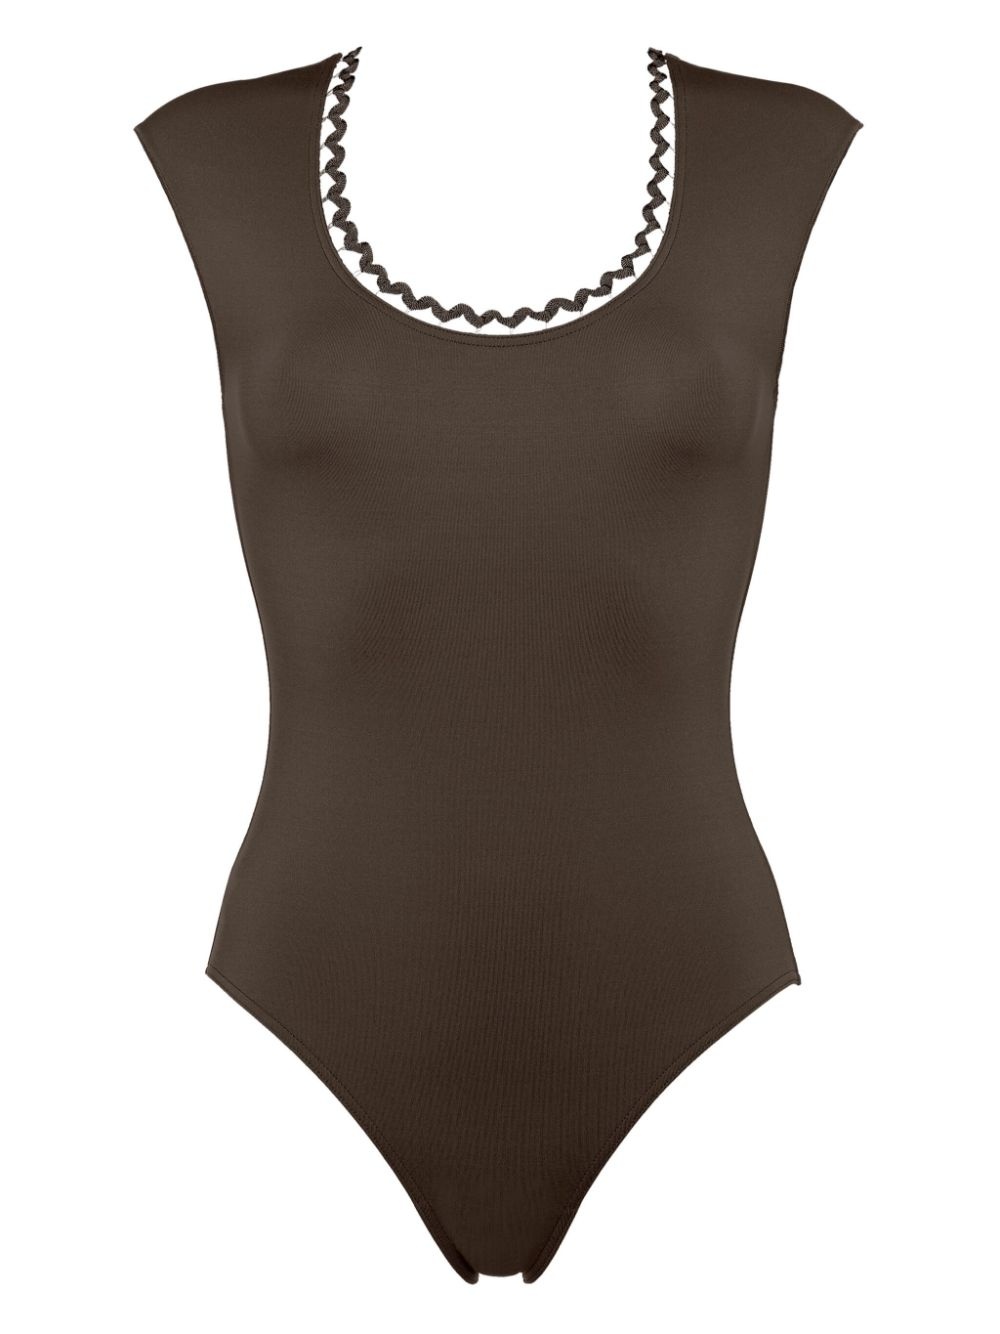 Party scalloped swimsuit - 1